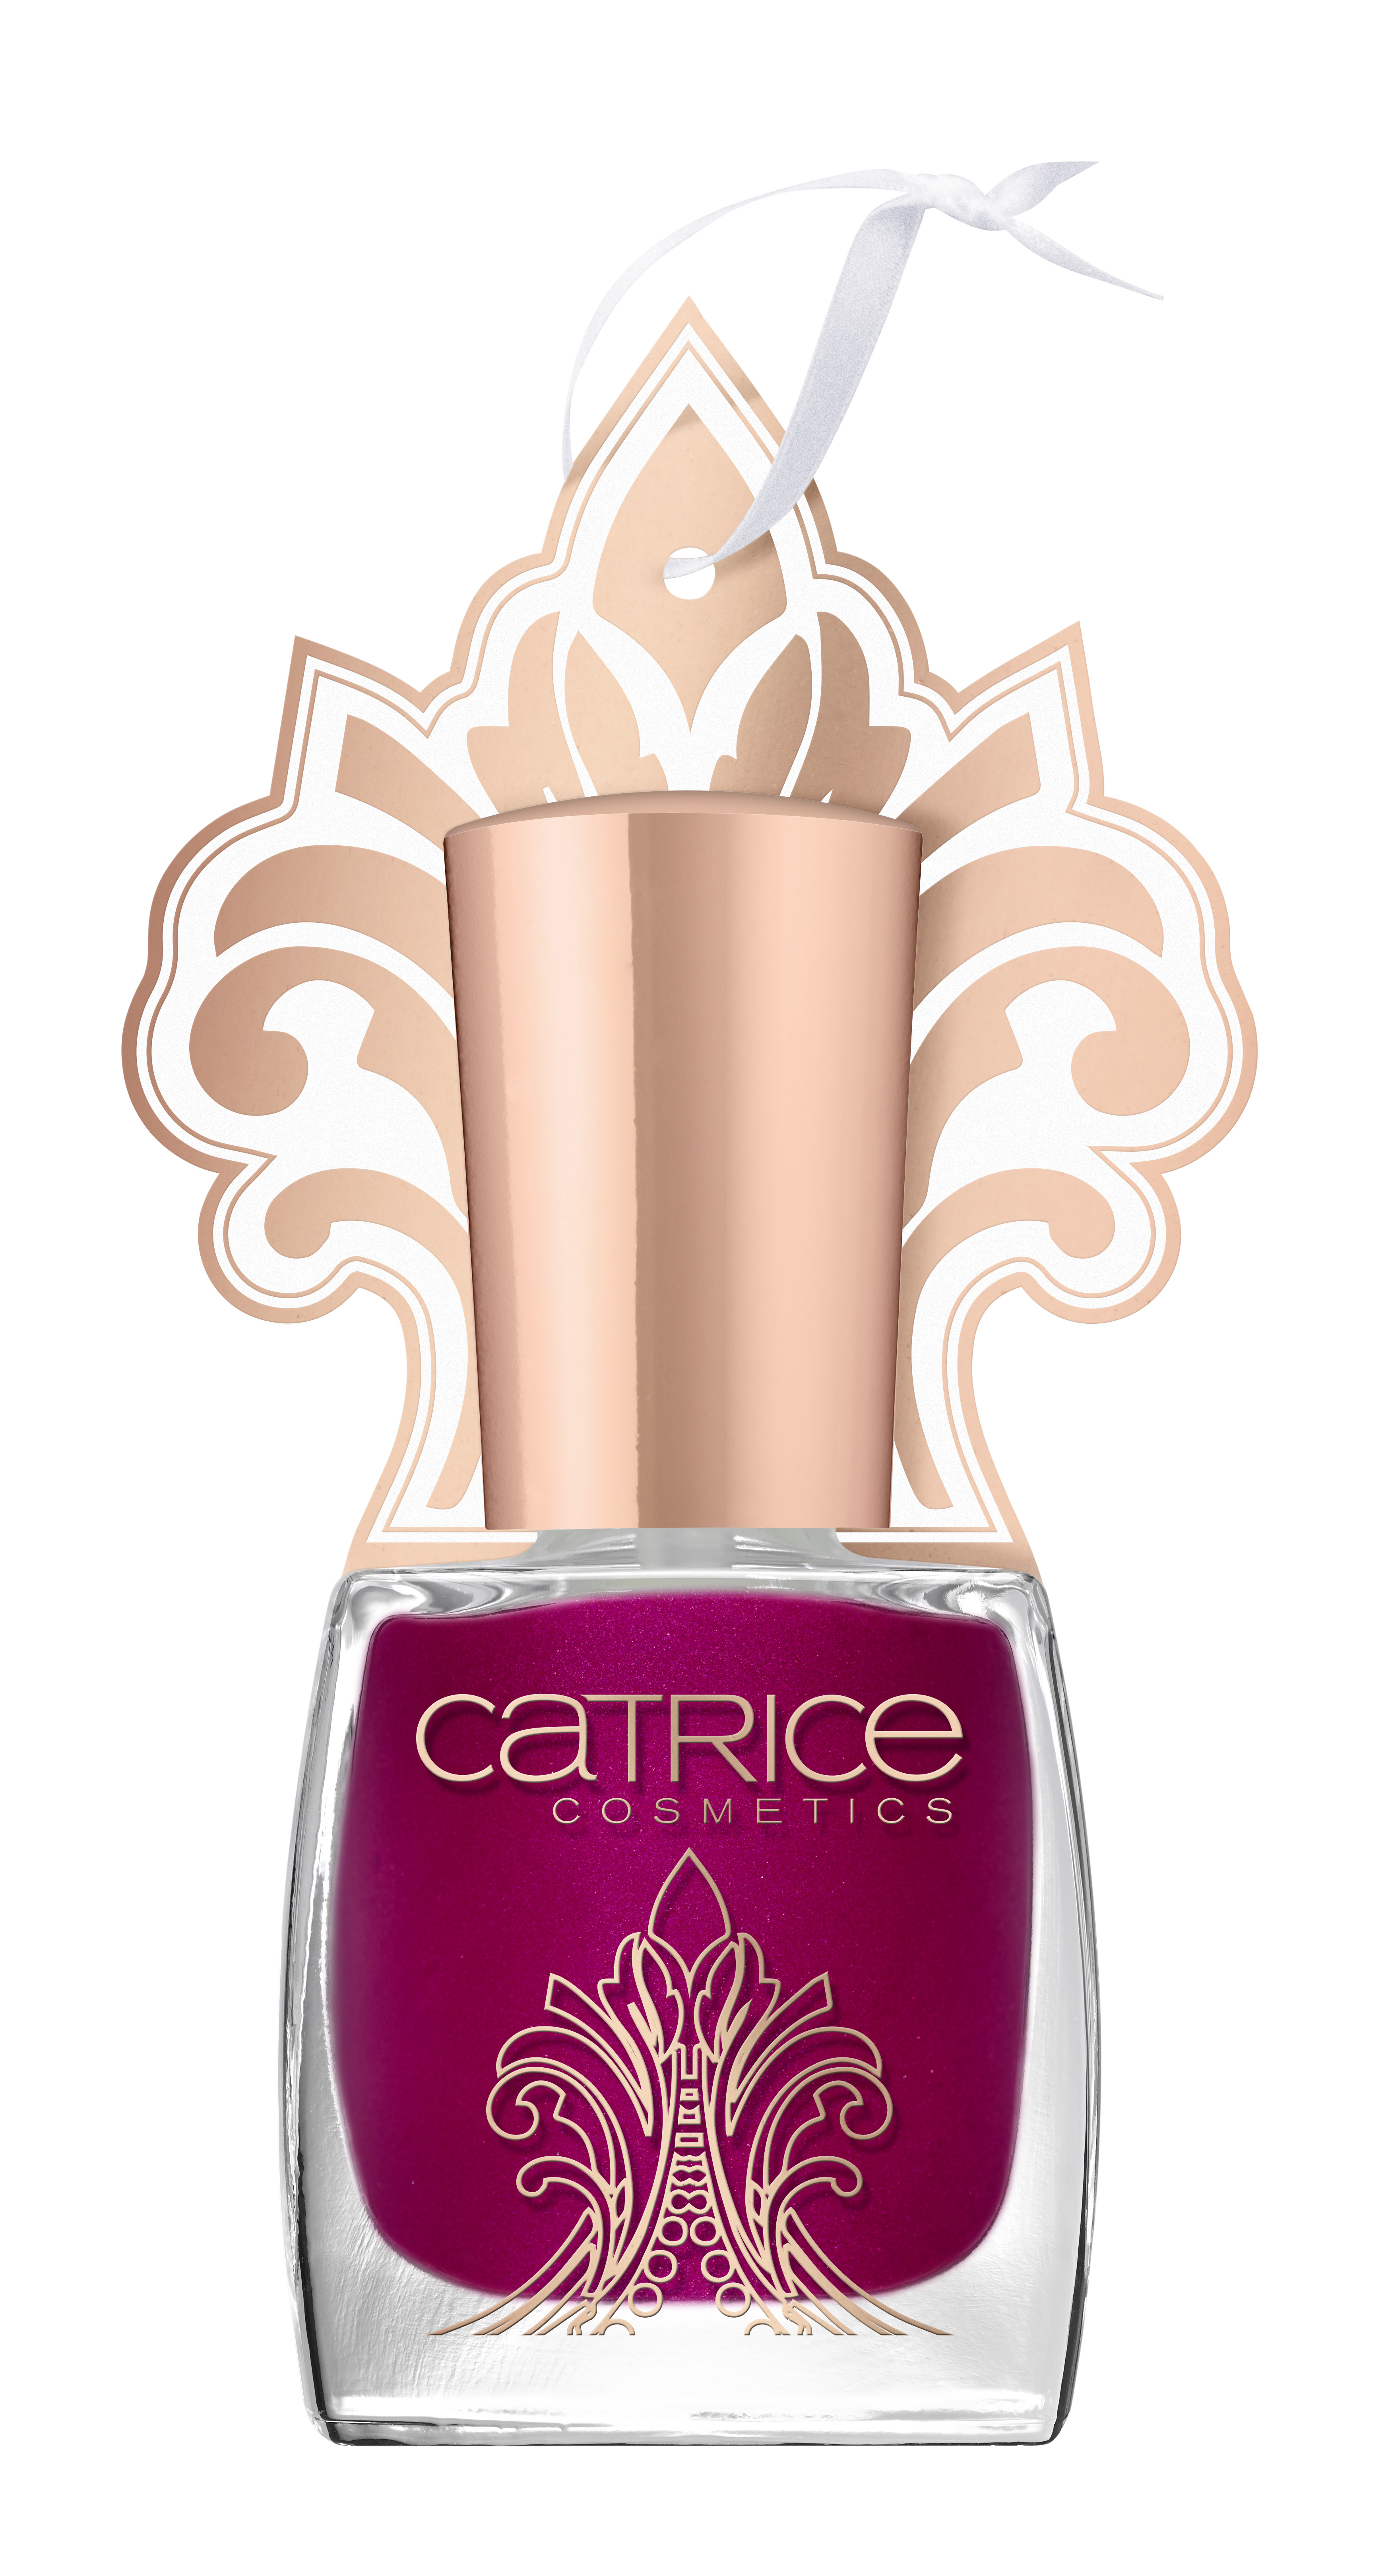 Catrice Victorian Poetry Satin Matt Nail Lacquer C02